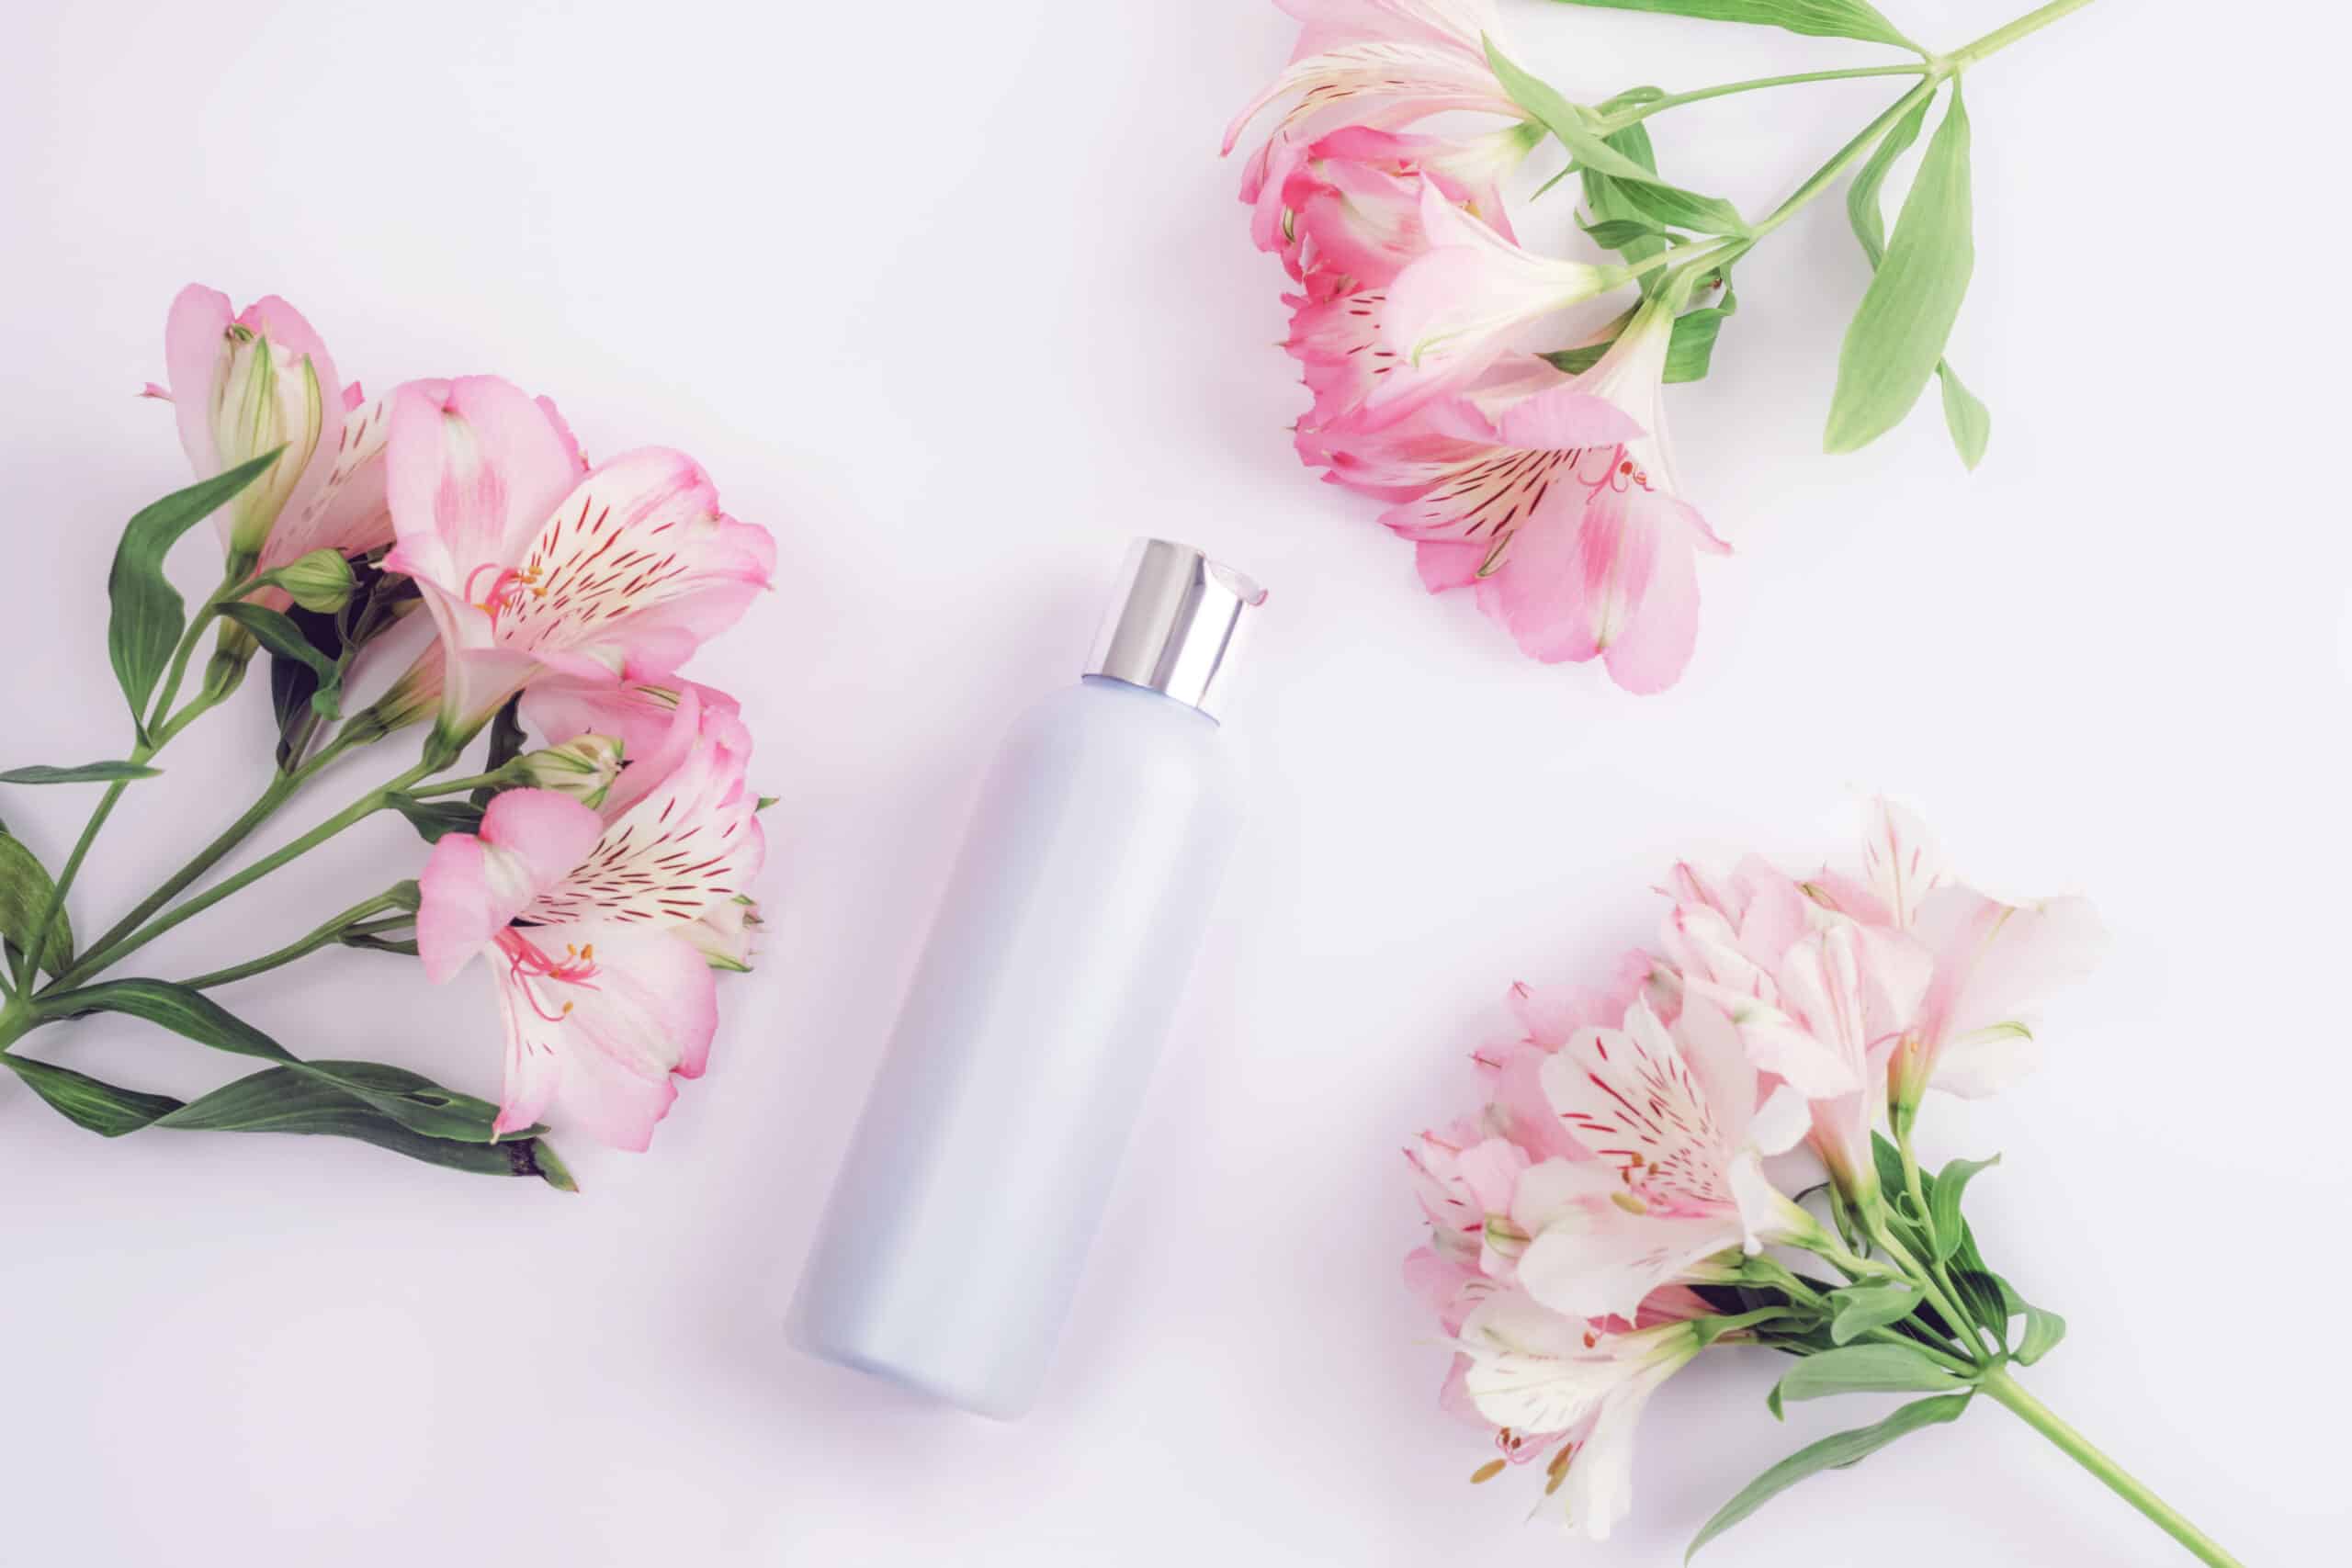 blue cosmetic bottle and alstroemeria pink flowers on white background, flat lay, top view. blank label for branding, mockup. natural organic eco cosmetics